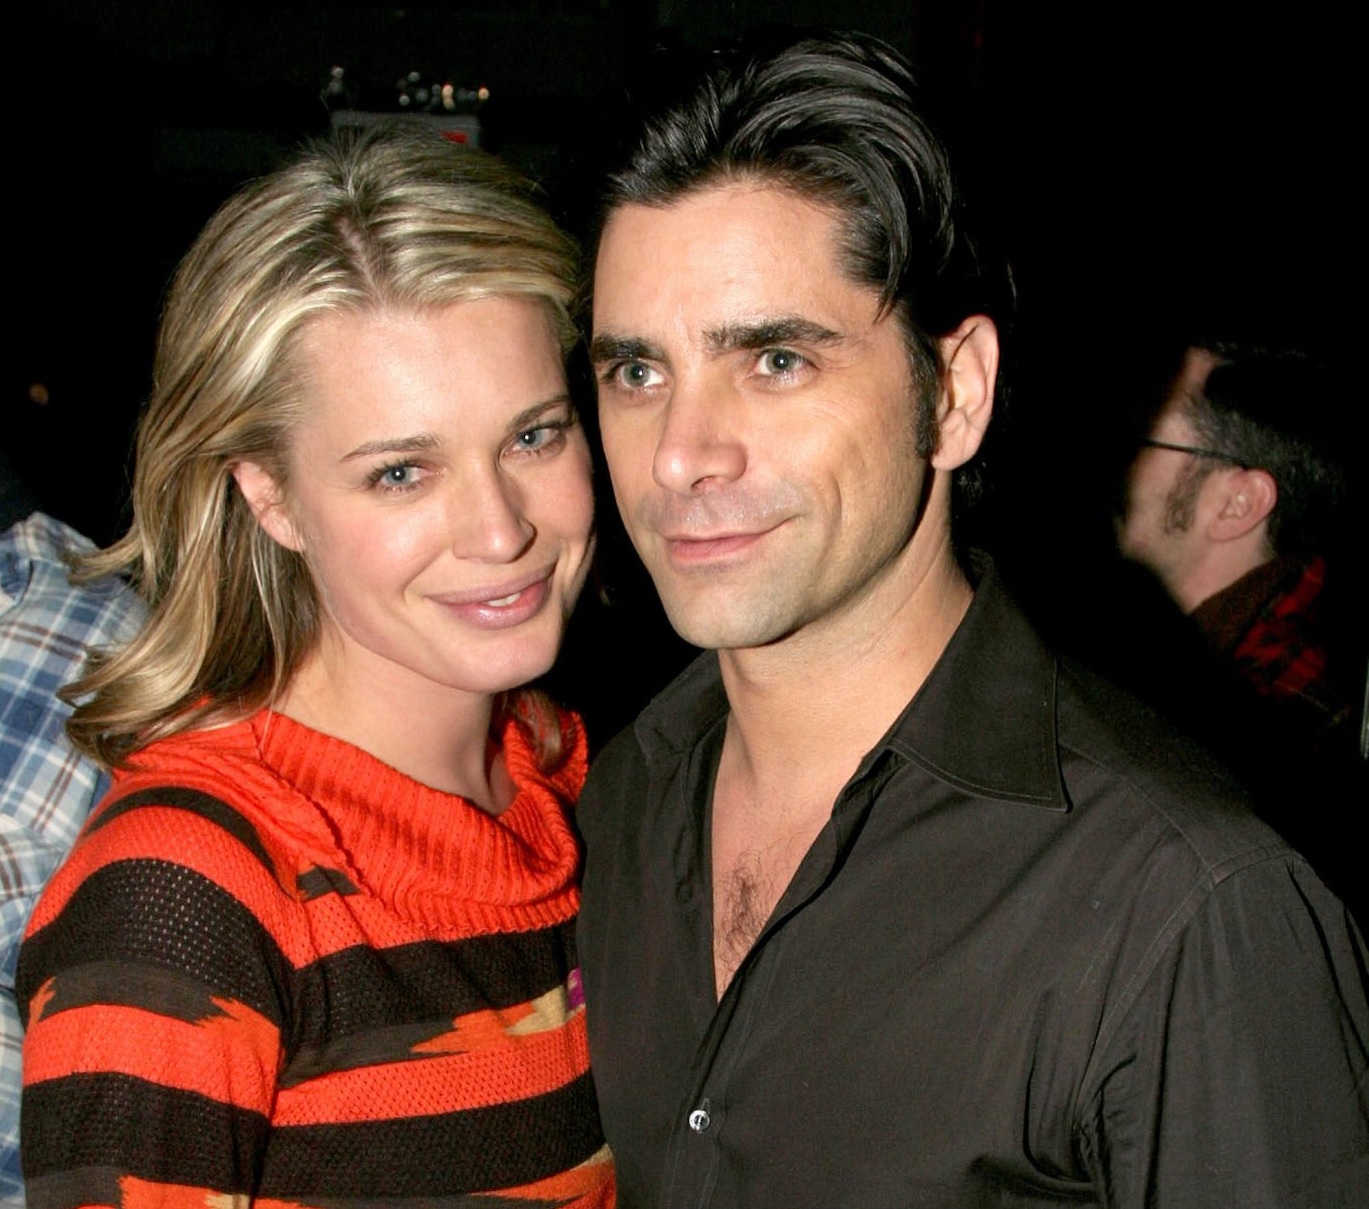 Rebecca Romijn and John Stamos in A Benefit for Everybody Wins Children's Literacy Fund in New York